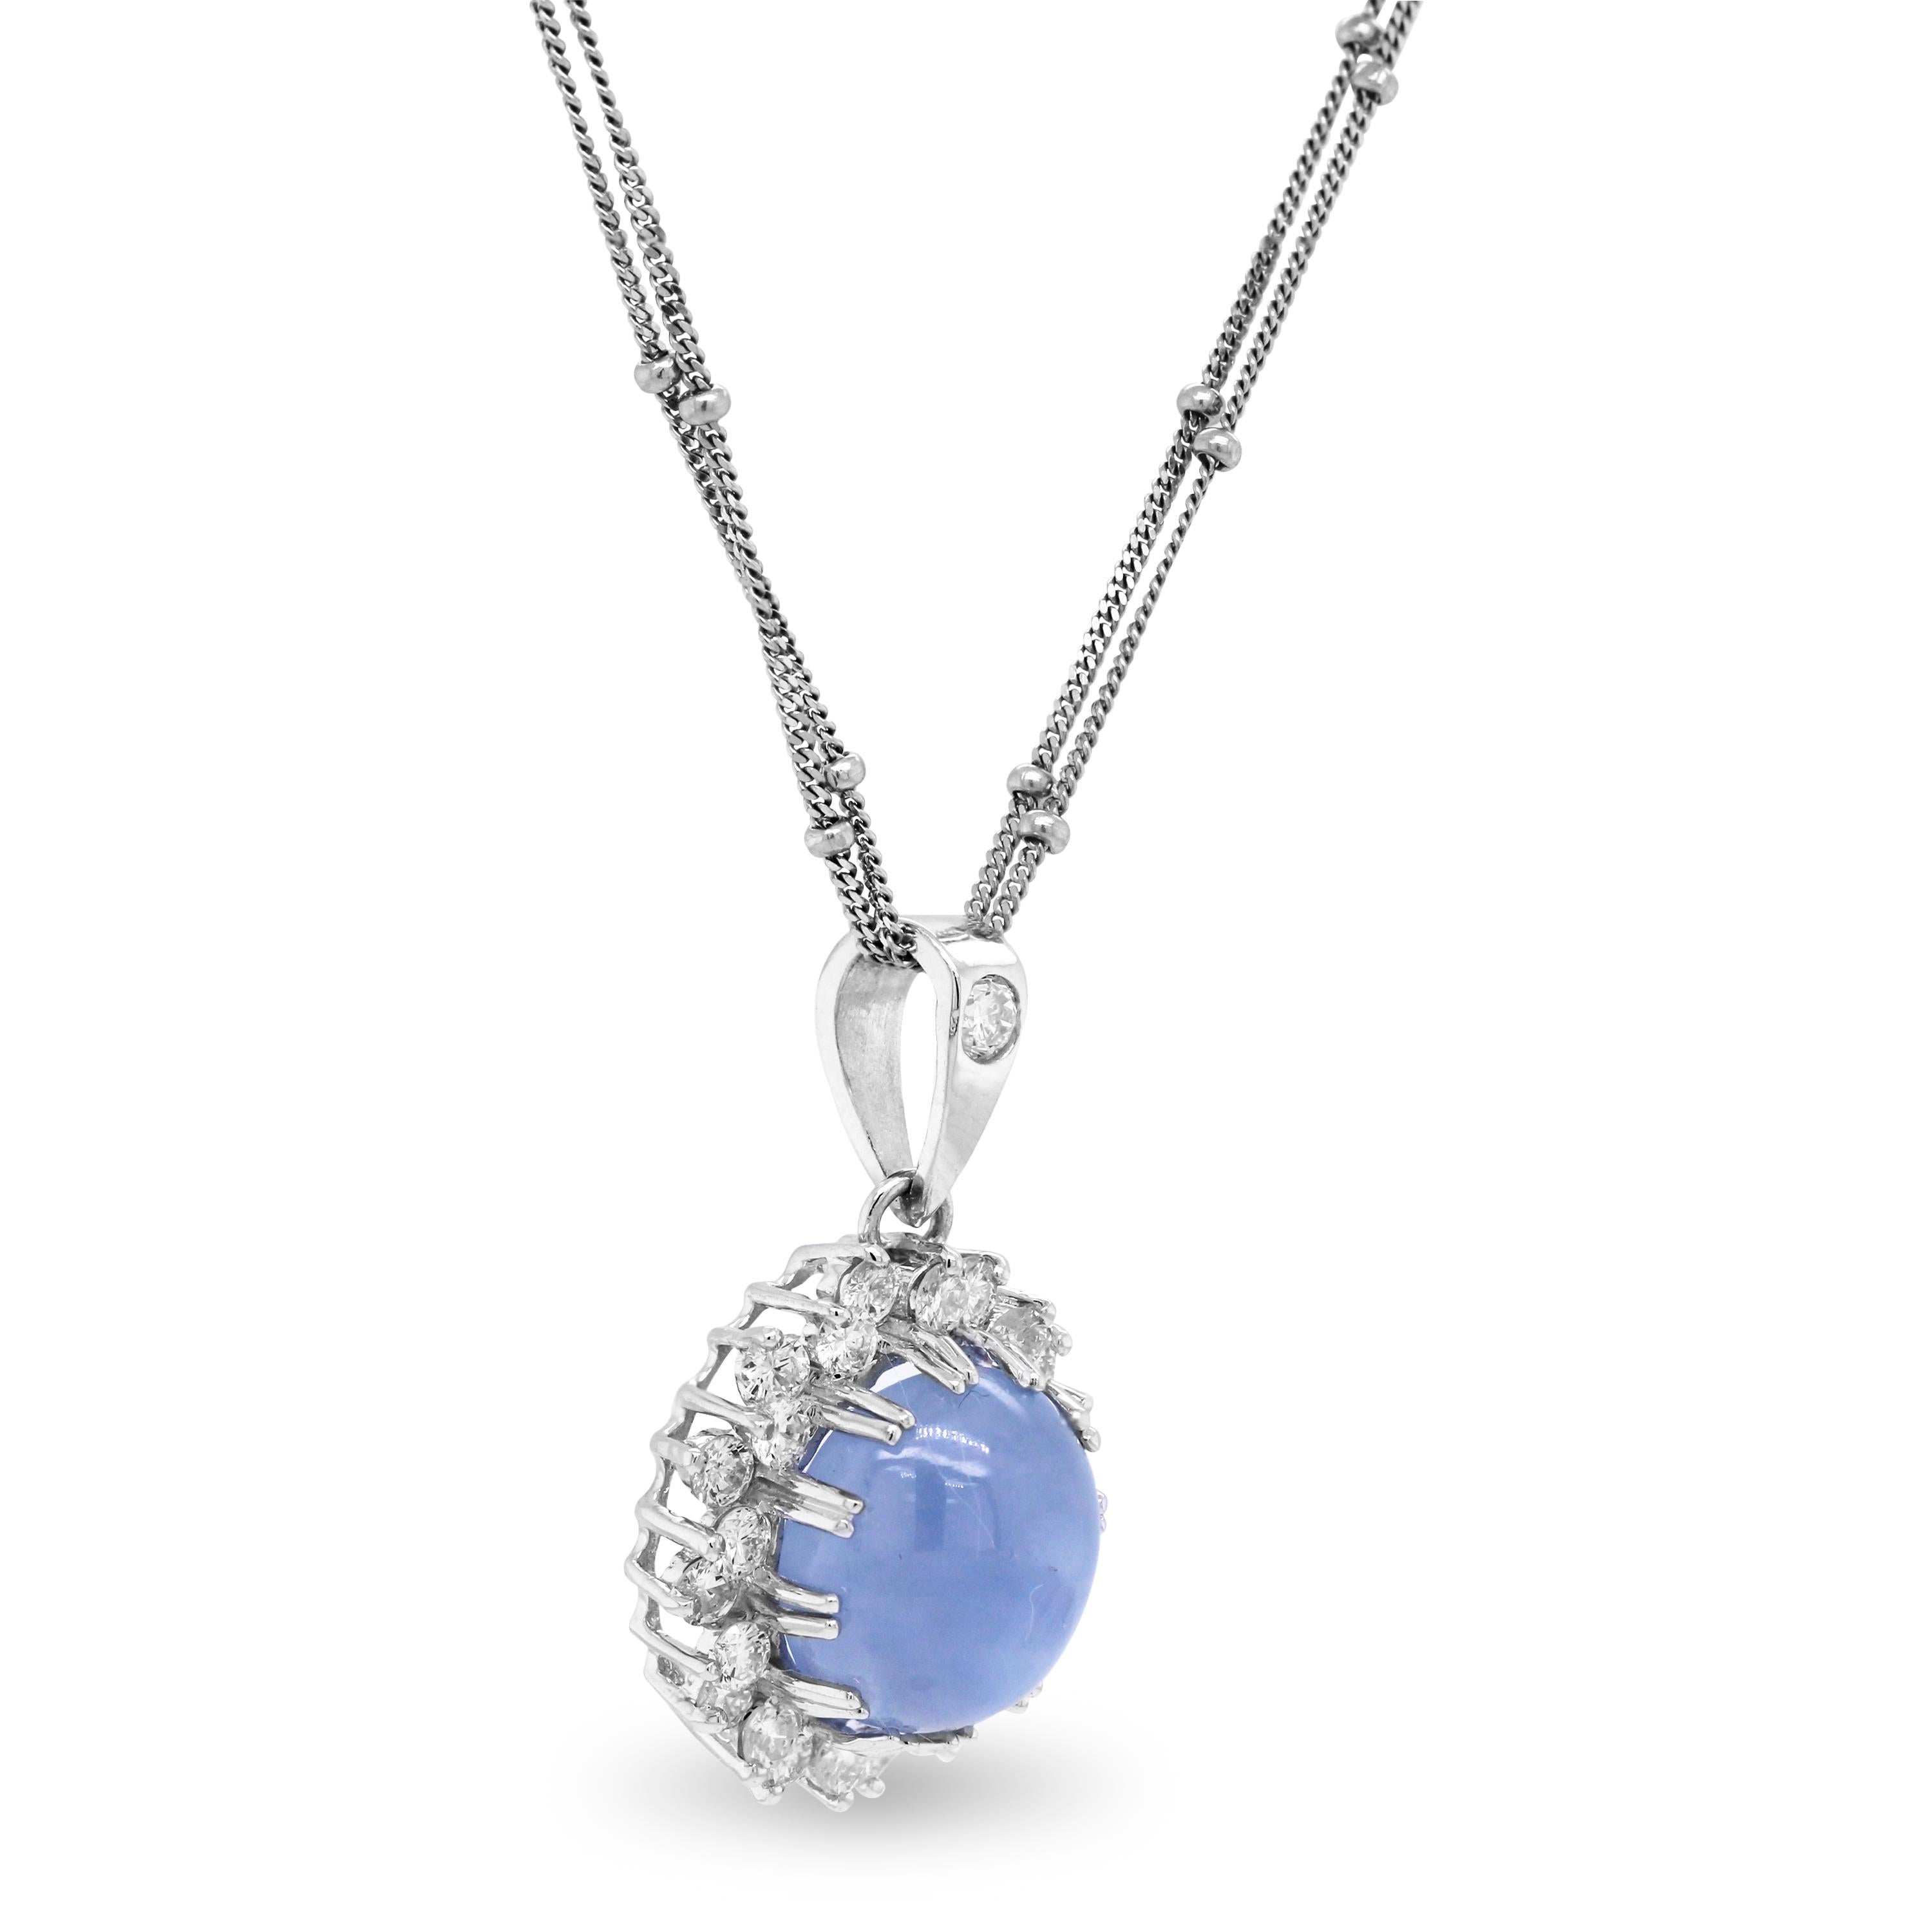 Cabochon Blue Sapphire and Diamond 18K White Gold Pendant with Double Link Chain

This beautiful Blue Sapphire center is a Cabochon-cut, oval with diamonds surrounding the center stone all around. 

1.40 carat Cabochon Blue Sapphire center
1.36